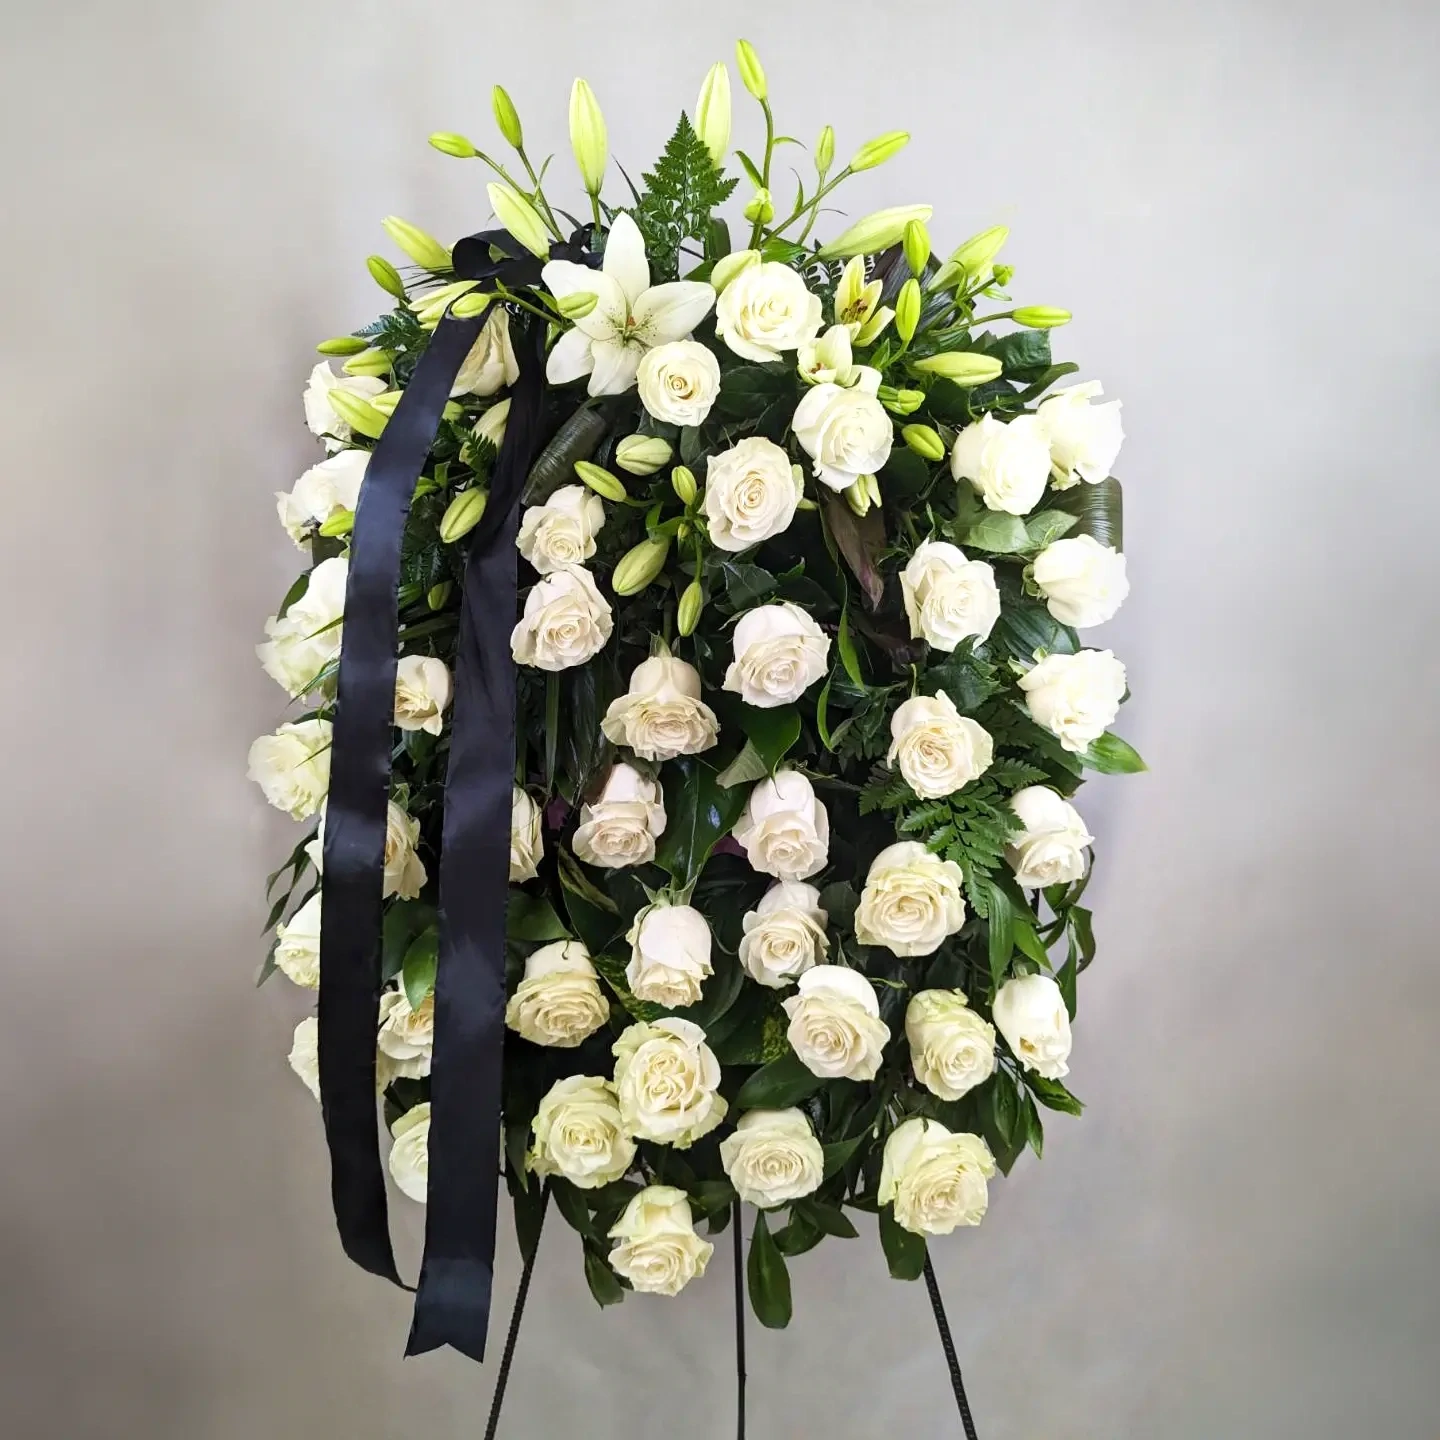 Funeral wreath with 50 white roses